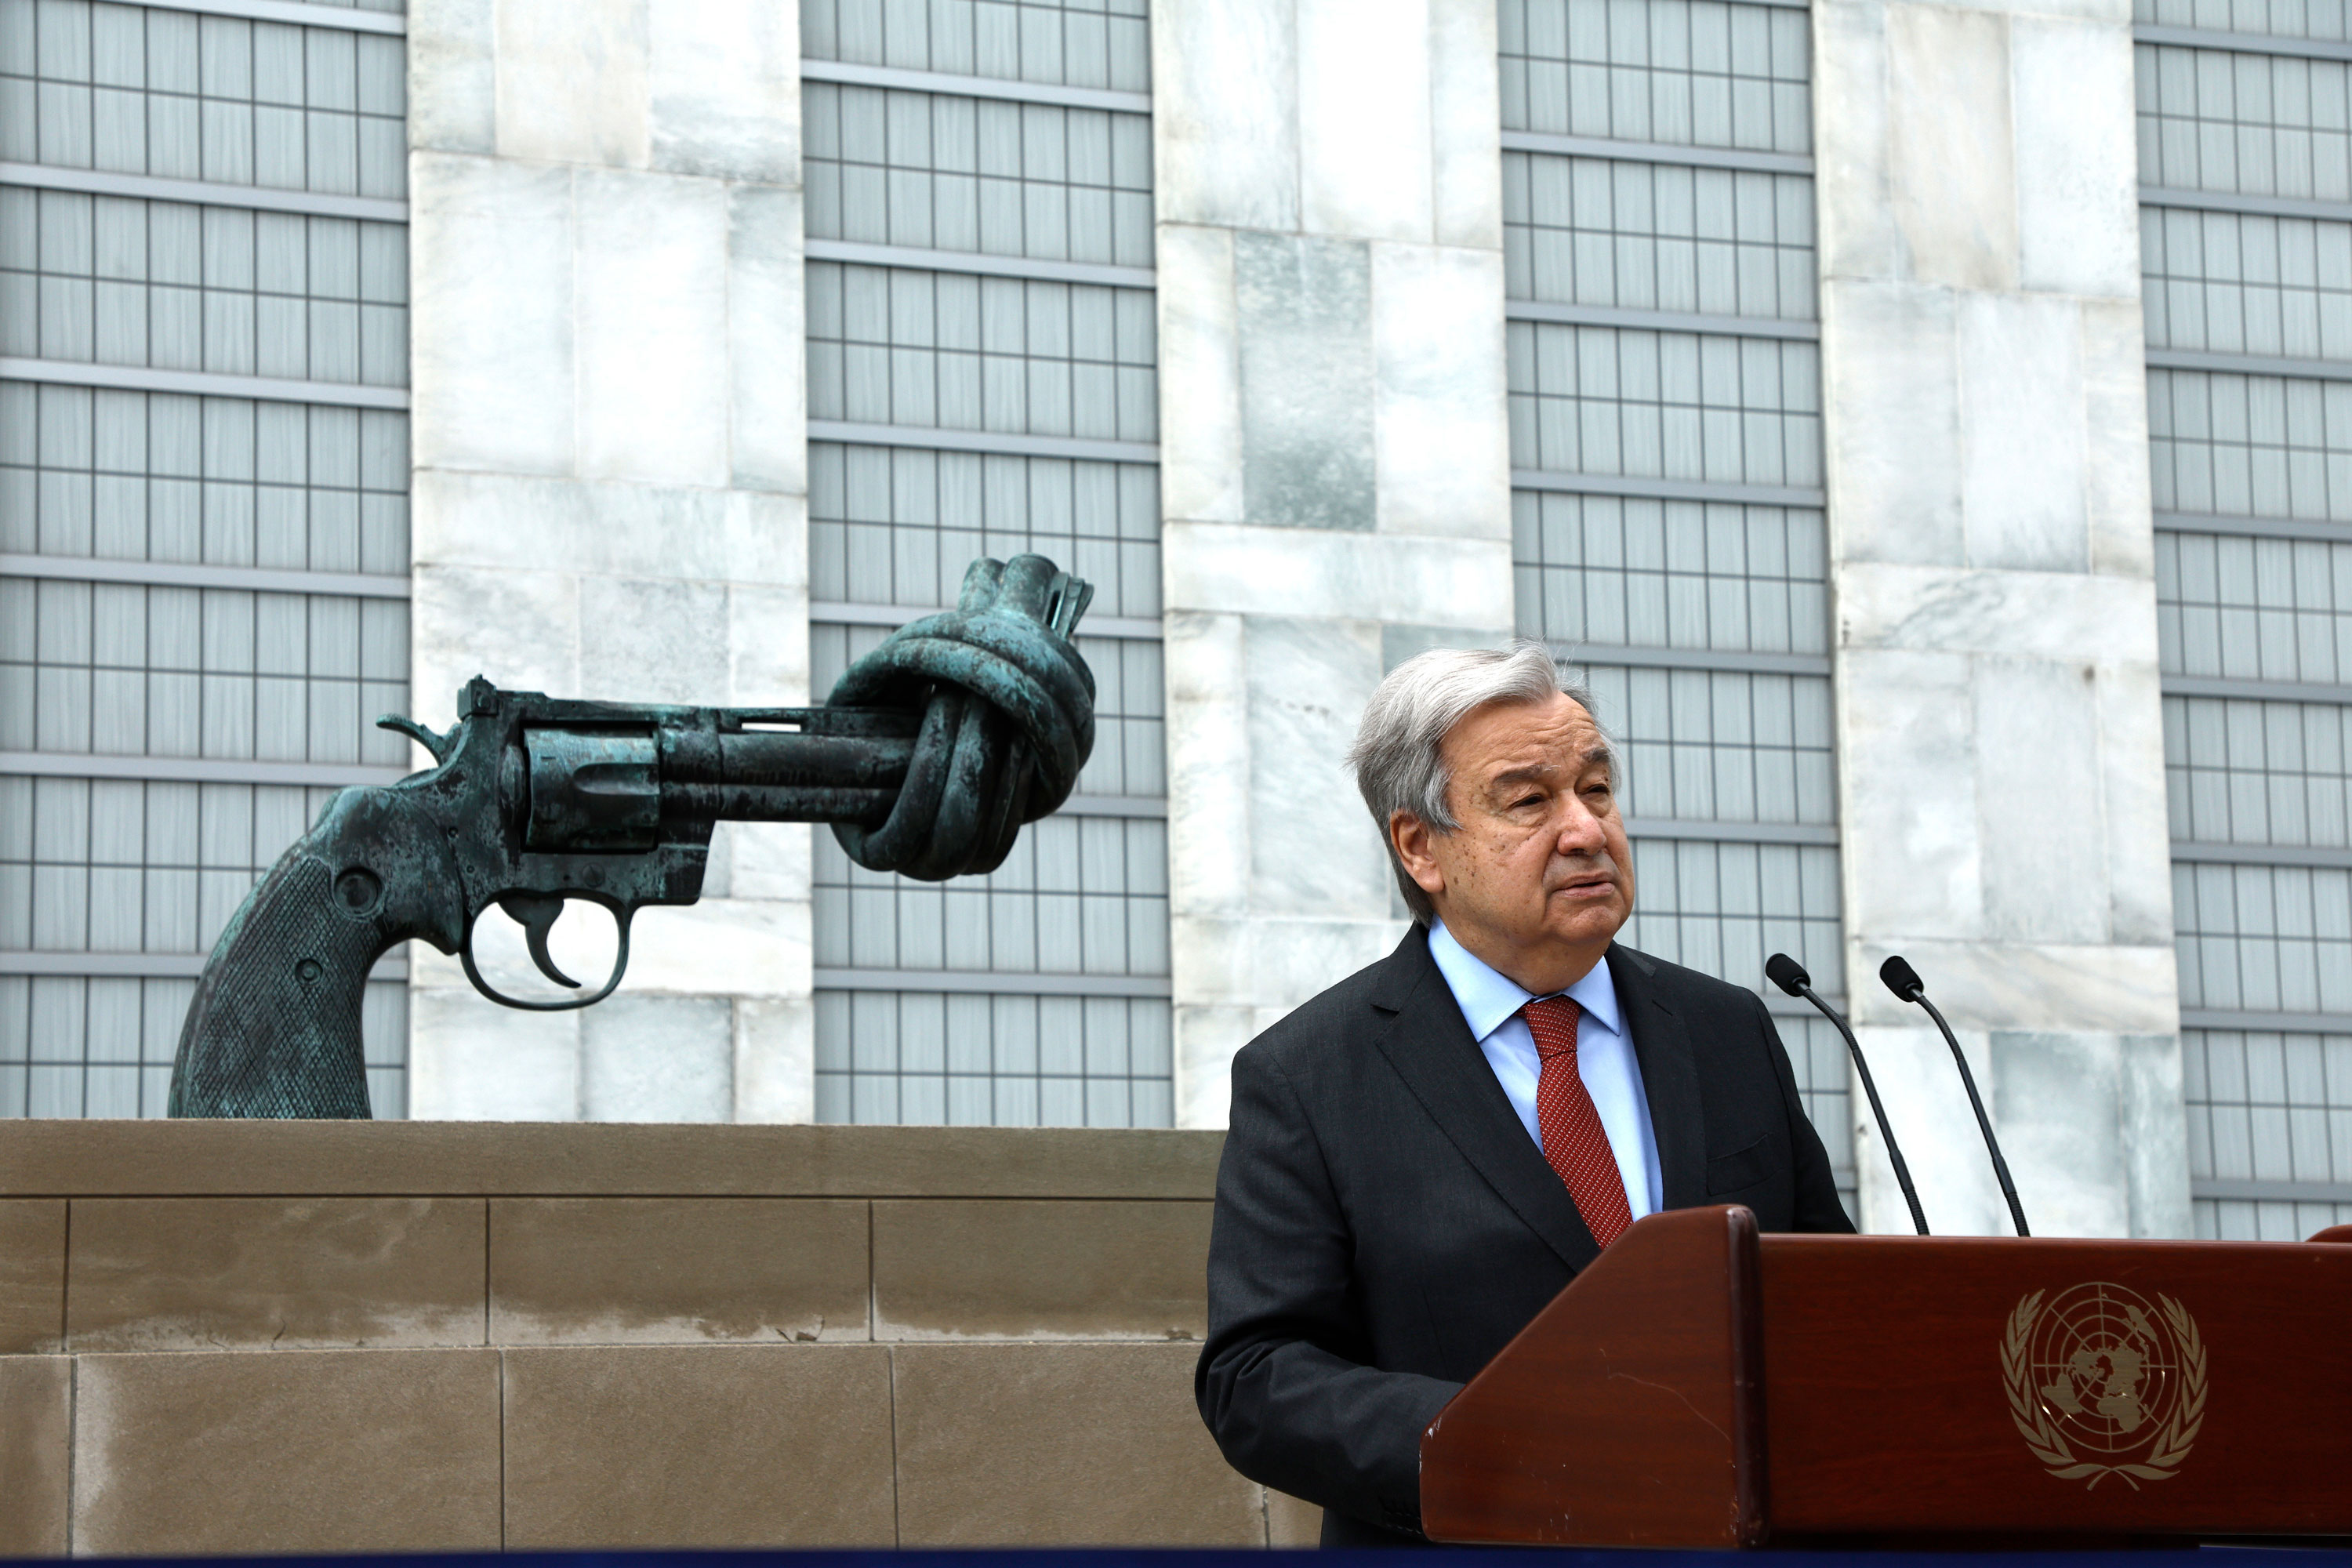 Antonio Guterres, United Nations Secretary-General, speaks to the press about the current situation in Ukraine at the United Nations Headquarters on April 19, 2022 in New York City. The Secretary General called for an immediate cease fire during the Holy Week and the opening of humanitarian pathways to freedom for Ukrainians.